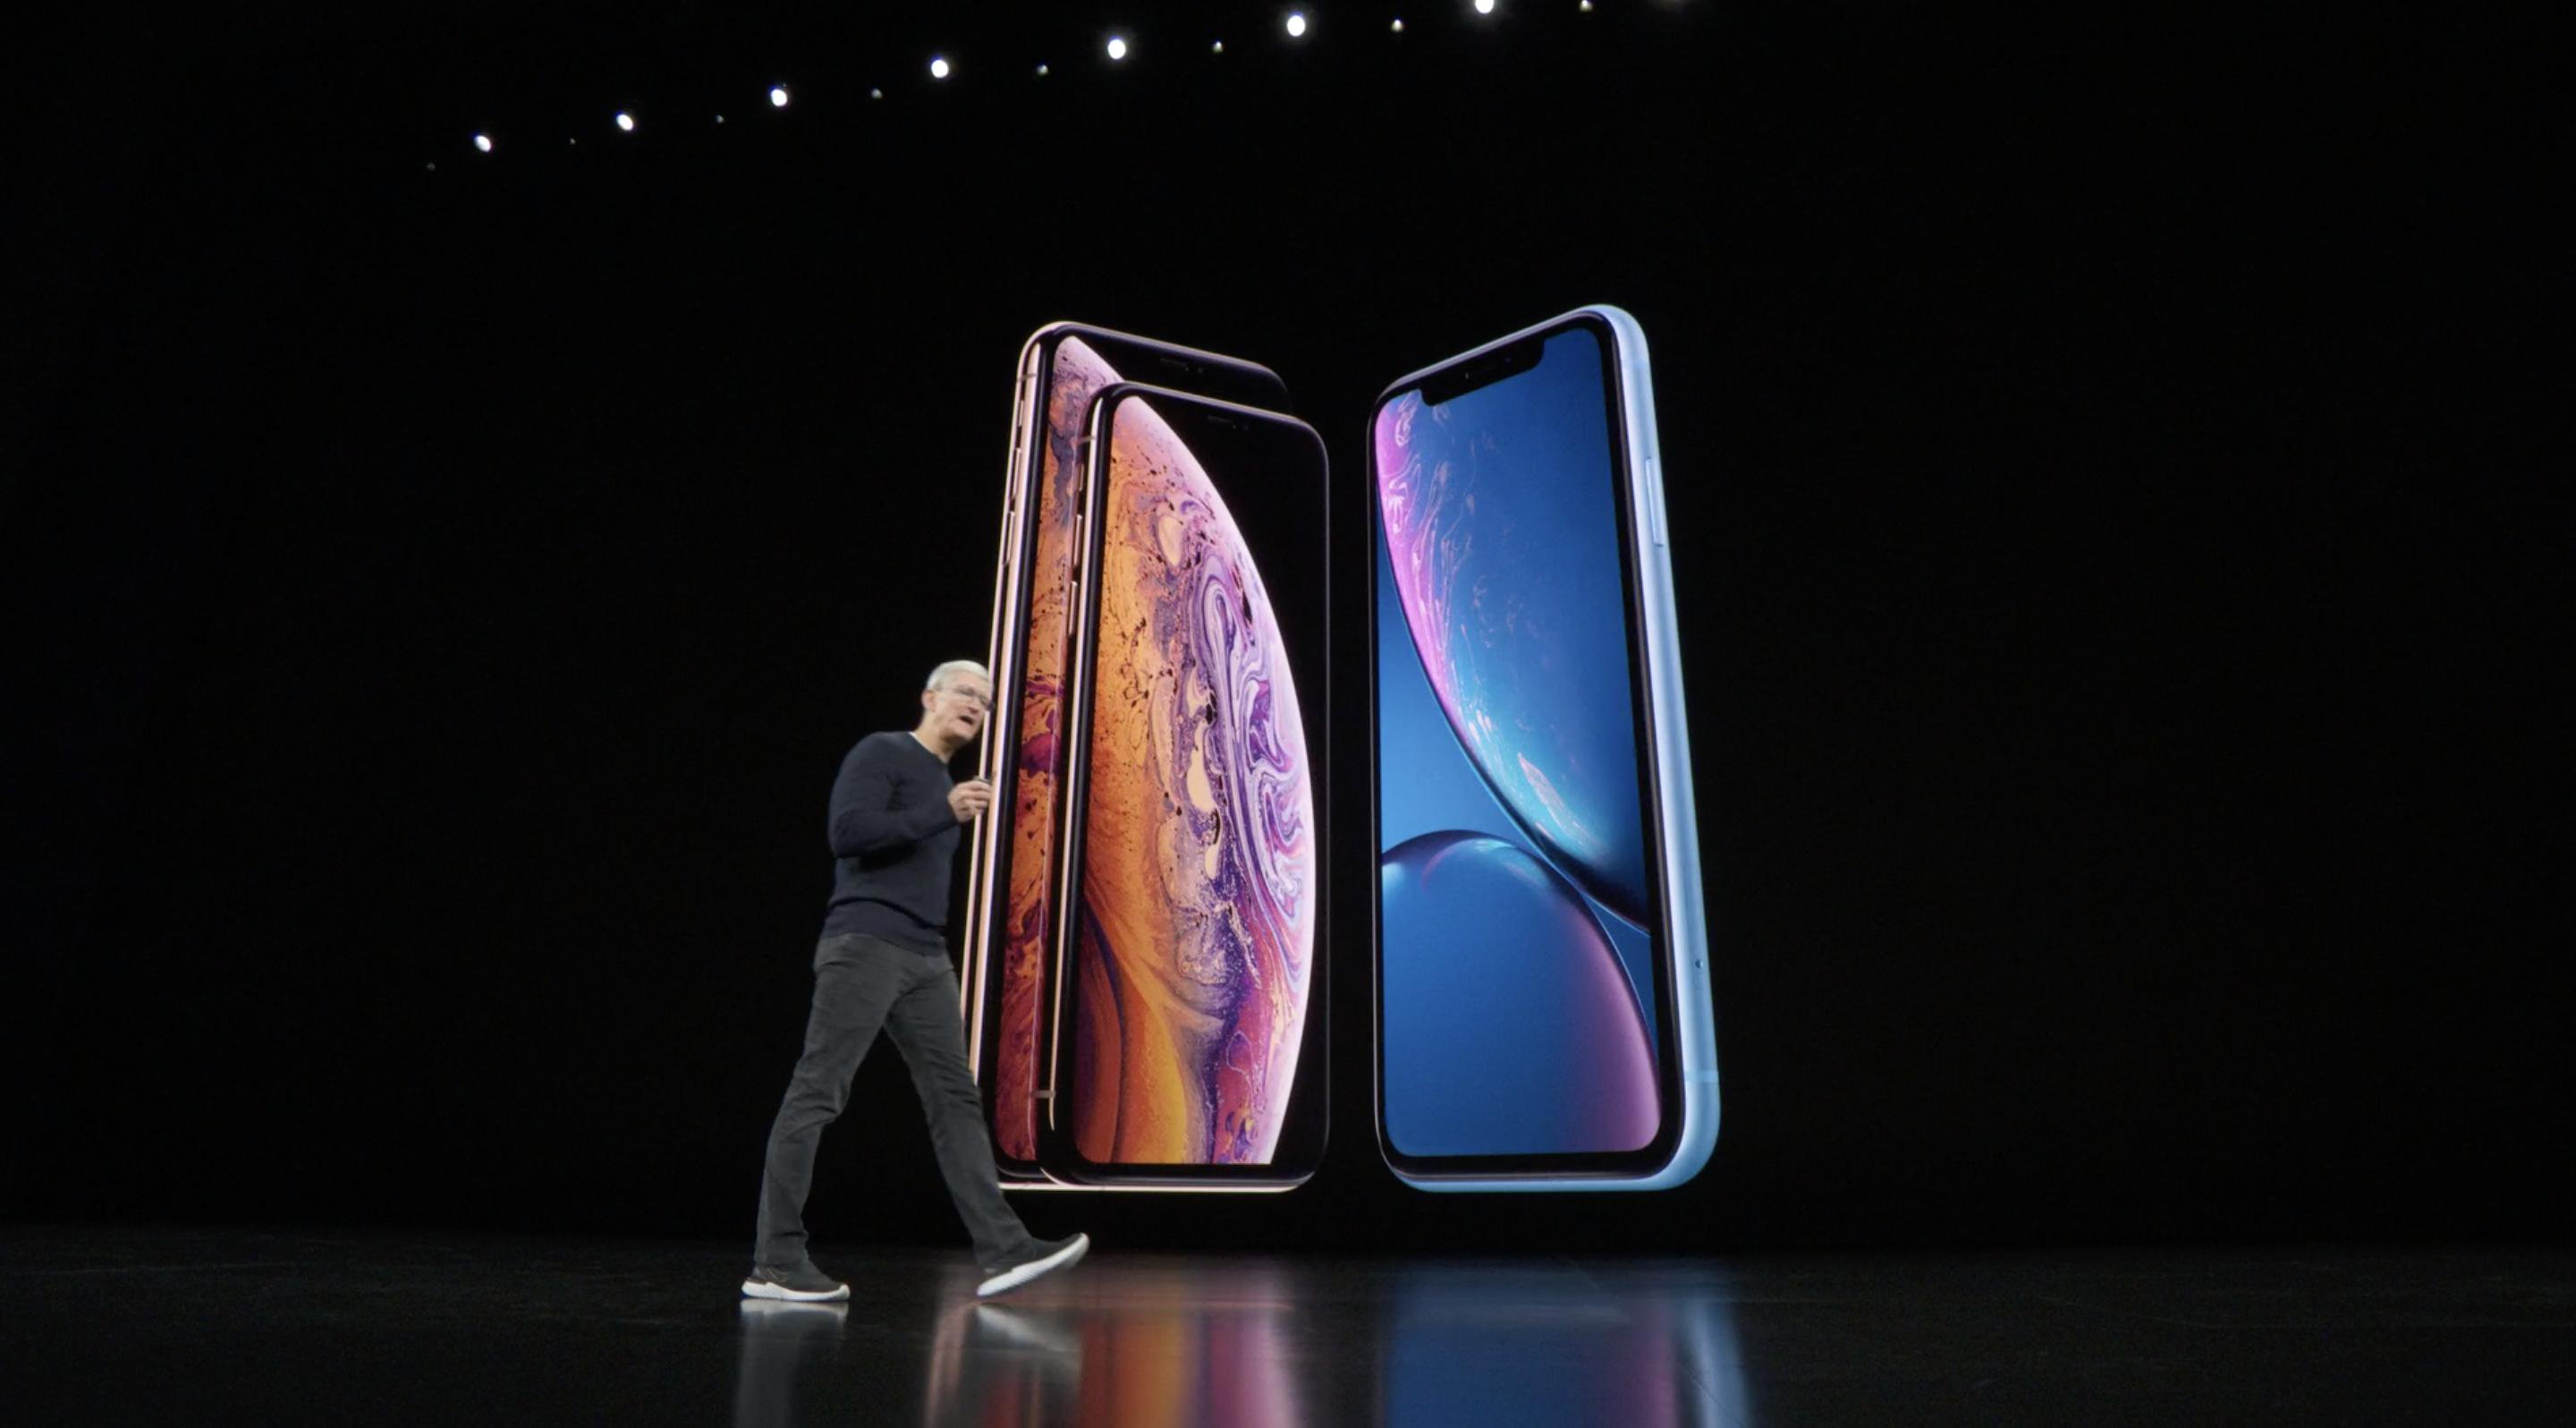 Keynote Septiembre 2019: iPhone XS y XR con Tim Cook